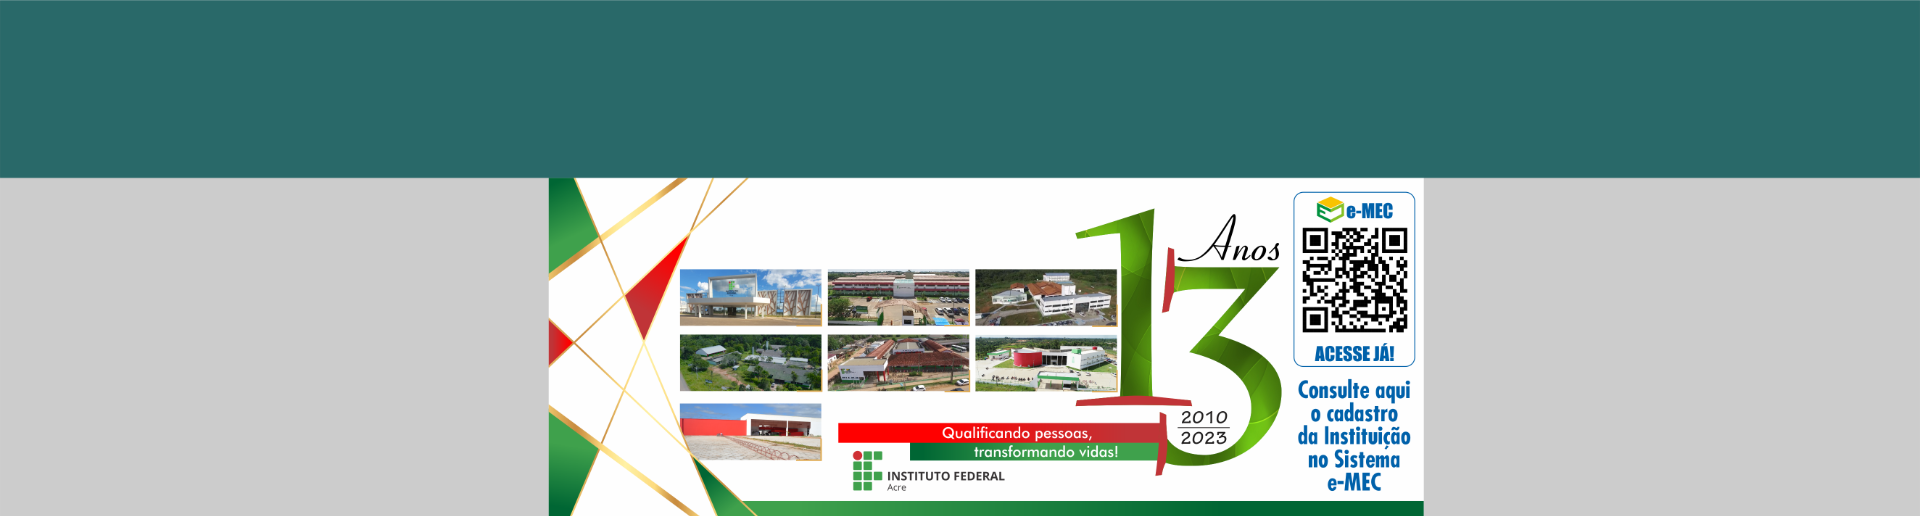 _Ifac_13_anos_FRONT_site_completo_.png